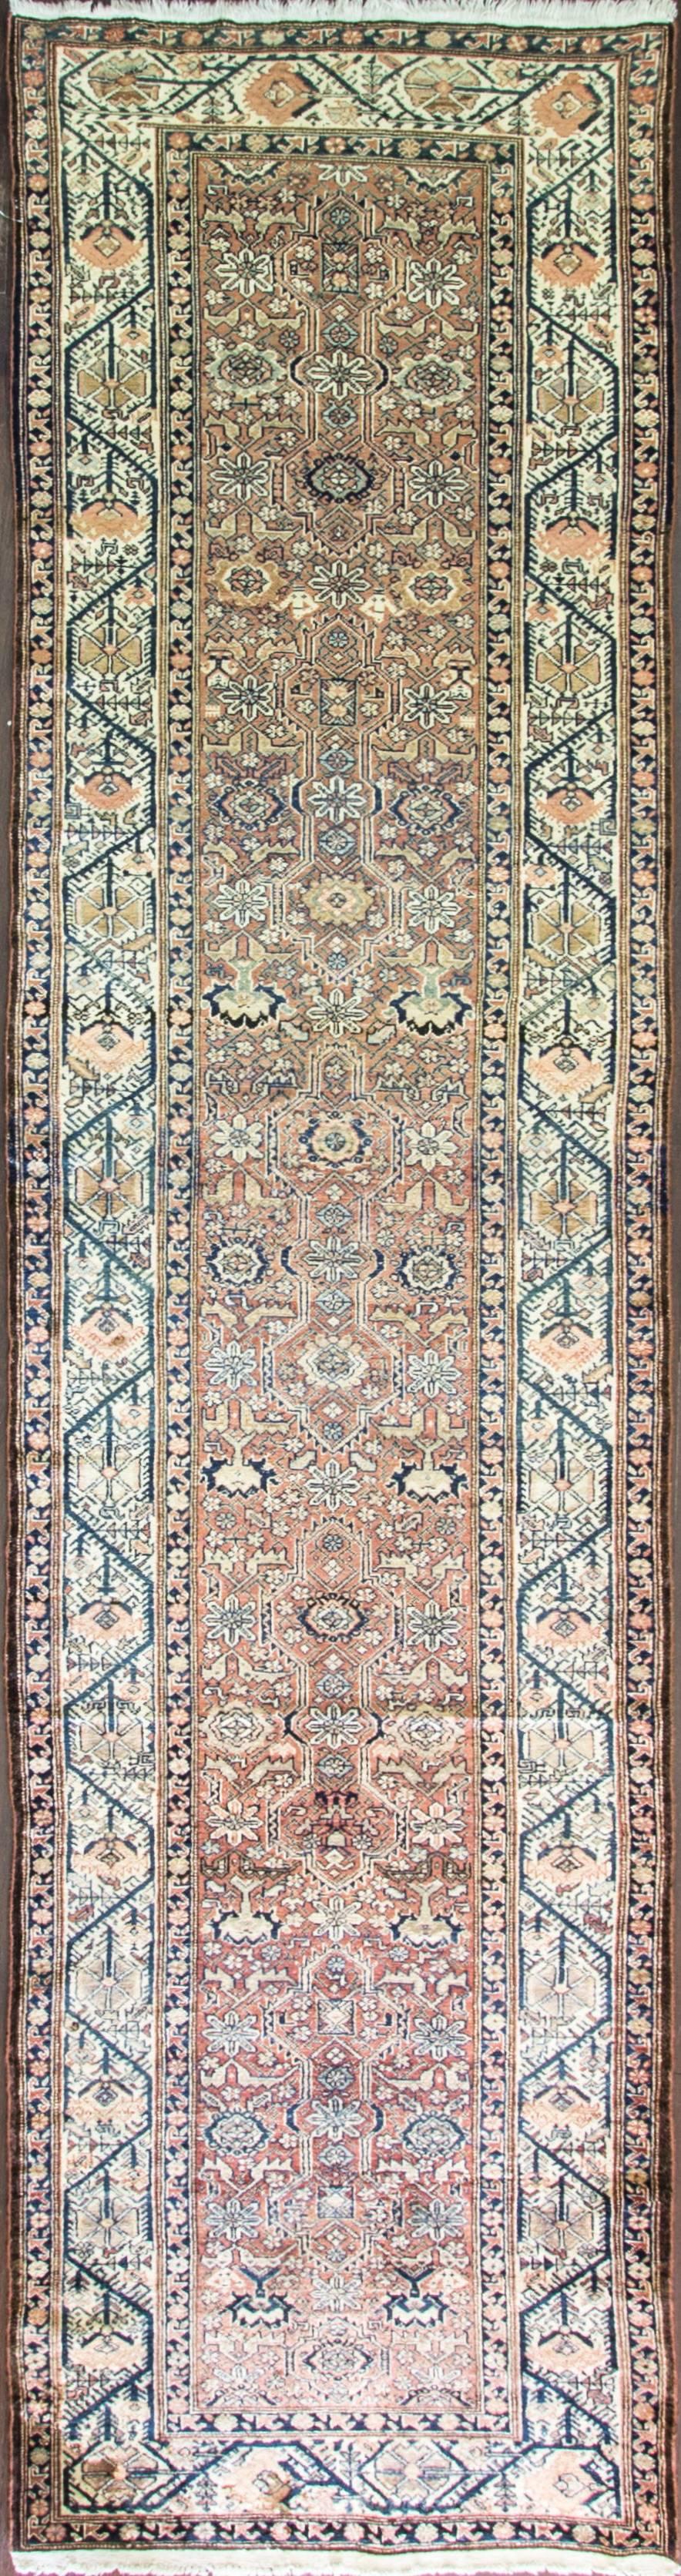 The tribal weavers in Malayer were often Turkish, and they employed the Turkish knot. The Gourde is a symmetrical knot, as opposed to the asymmetrical knot of many traditionally Persian creations. Additionally, antique Malayer rugs regularly enjoy a